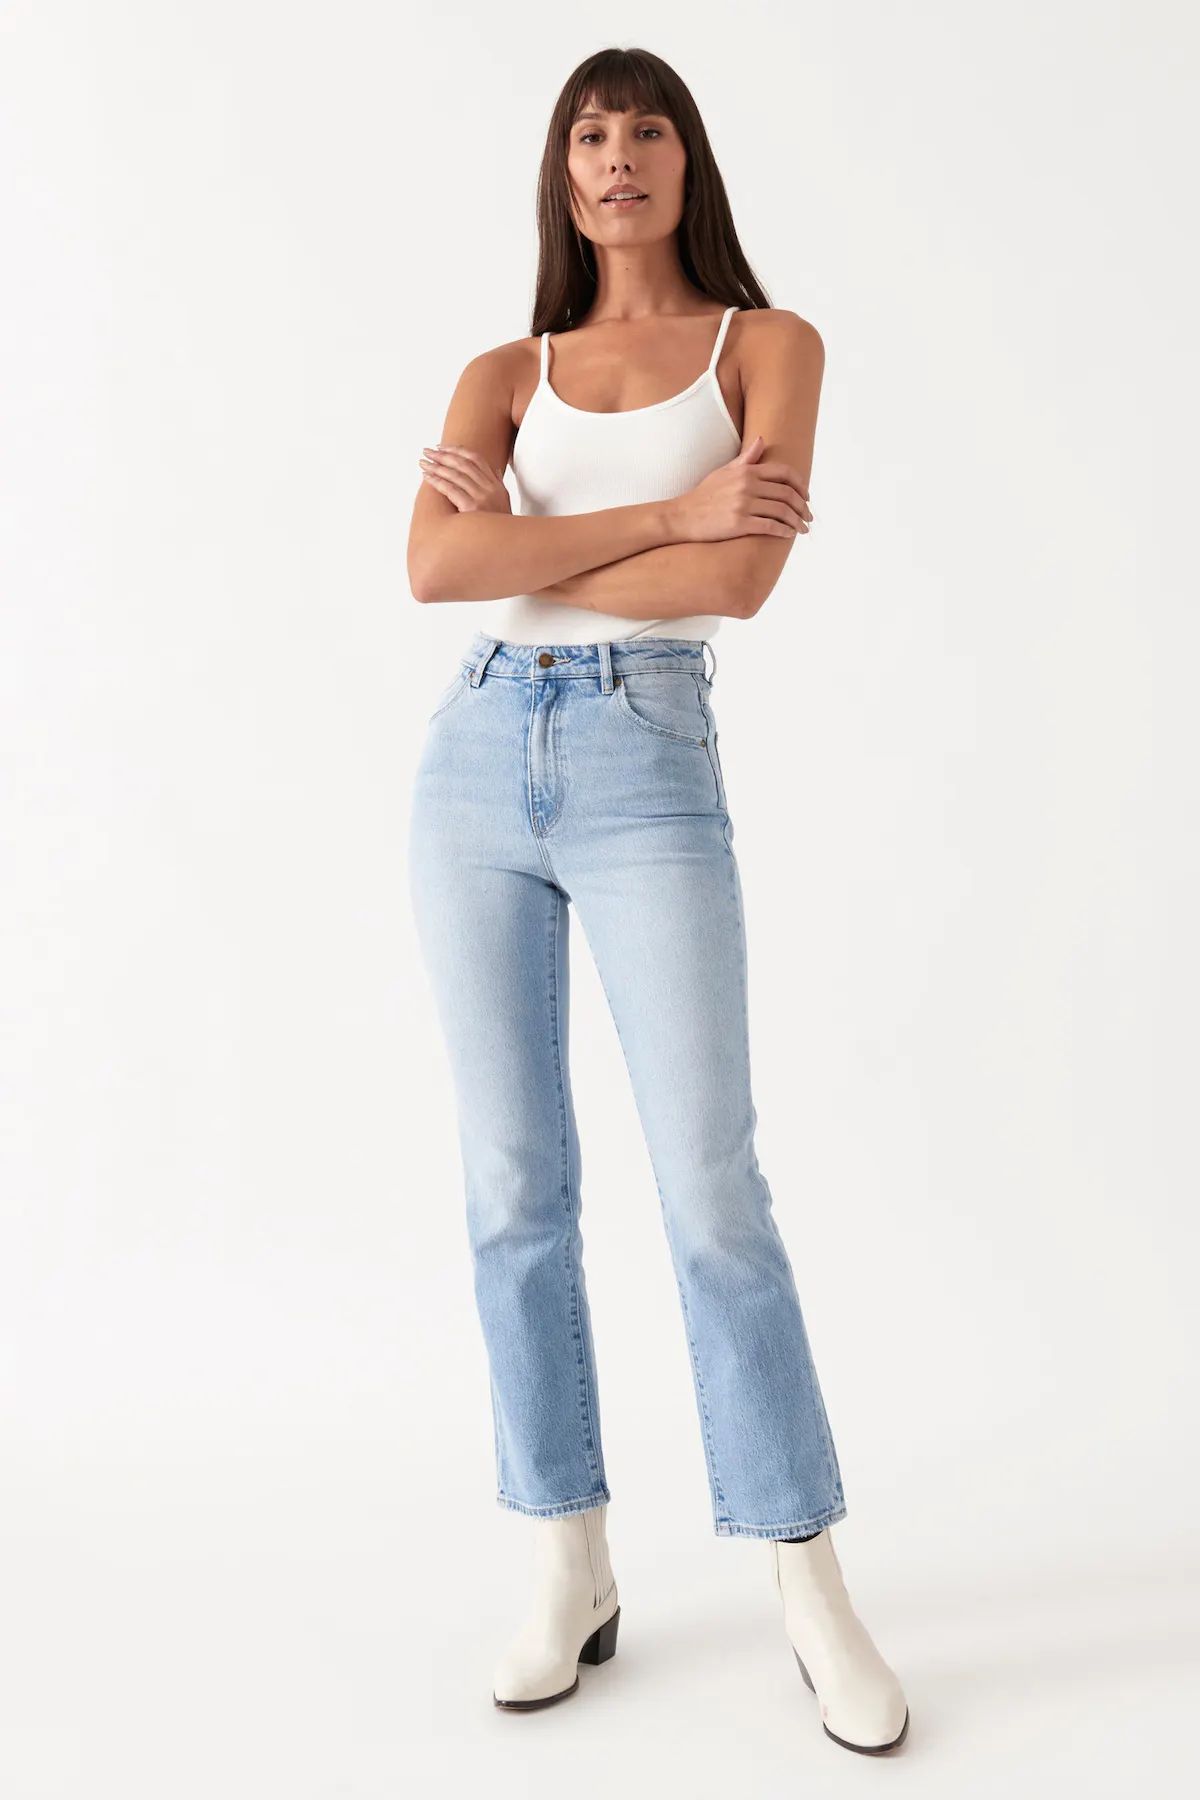 Original Straight - Faded Vintage | Rolla's Jeans US/CAN